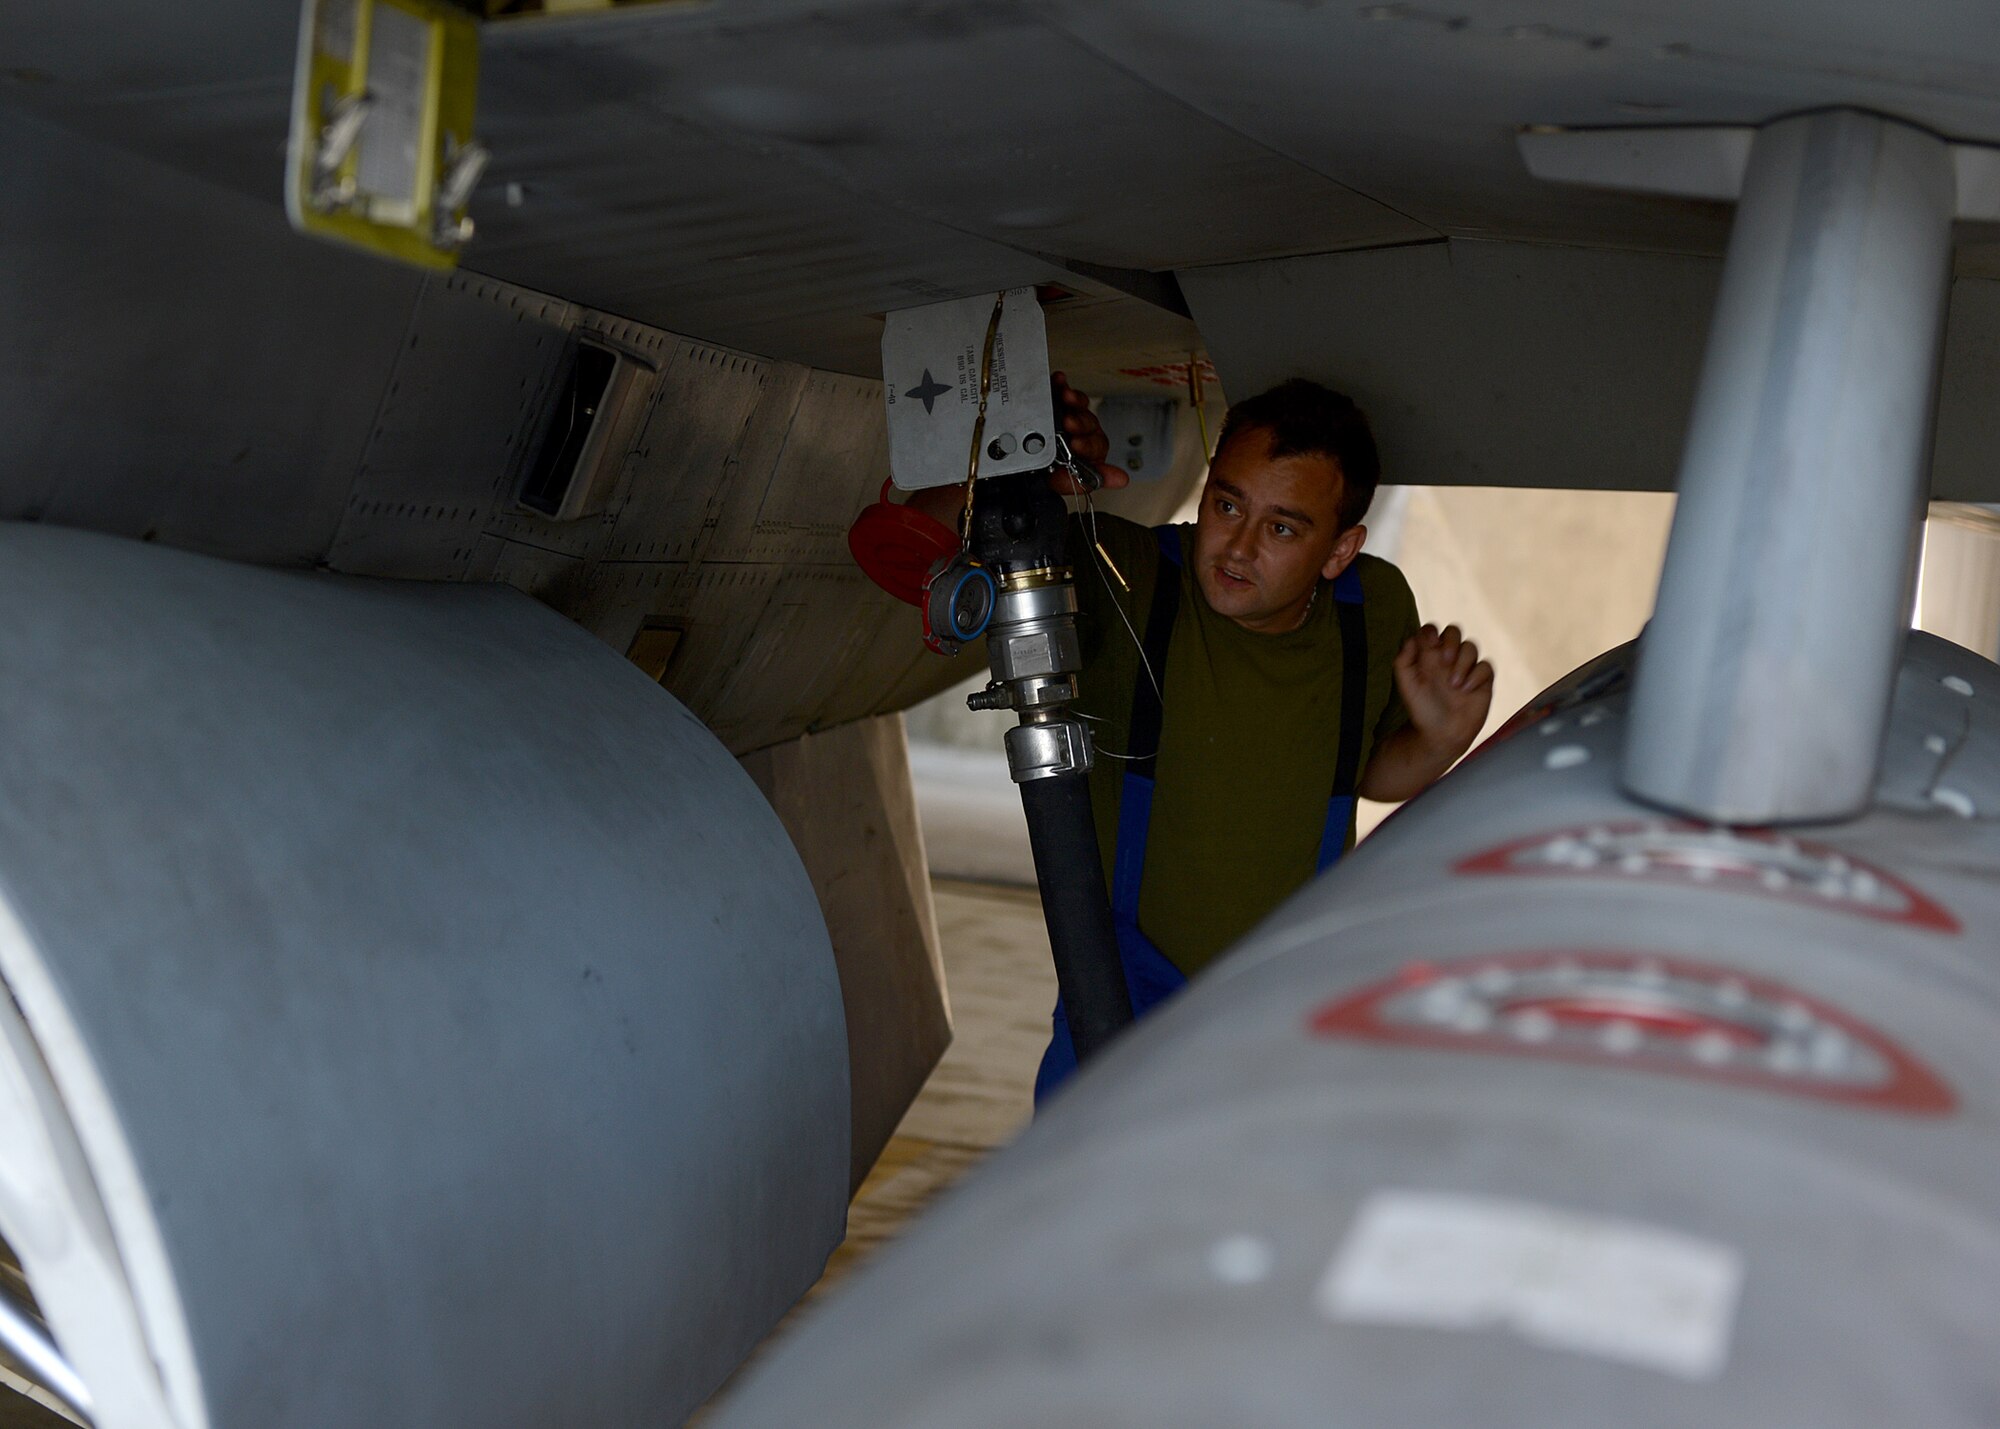 Polish air force Corporal Paliwoda Ukosz, fuels technician, refuels an aircraft before its departure, June 10, 2014, to join NATO allies in the sky above Lask Air Base, Poland. The U.S. and Polish continue to work together to refuel aircraft during Exercise EAGLE TALON, a Polish-led combined exercise. There are two shifts for refueling: day shift and night shift. The Polish Air Force refuels aircraft during the daily flying operations, while the U.S. Air Force executes hot pit refueling, which shortens the flying window and increases capability to fix aircraft in a timely manner. (U.S. Air Force photo by Airman 1st Class Kyle Gese/Released)